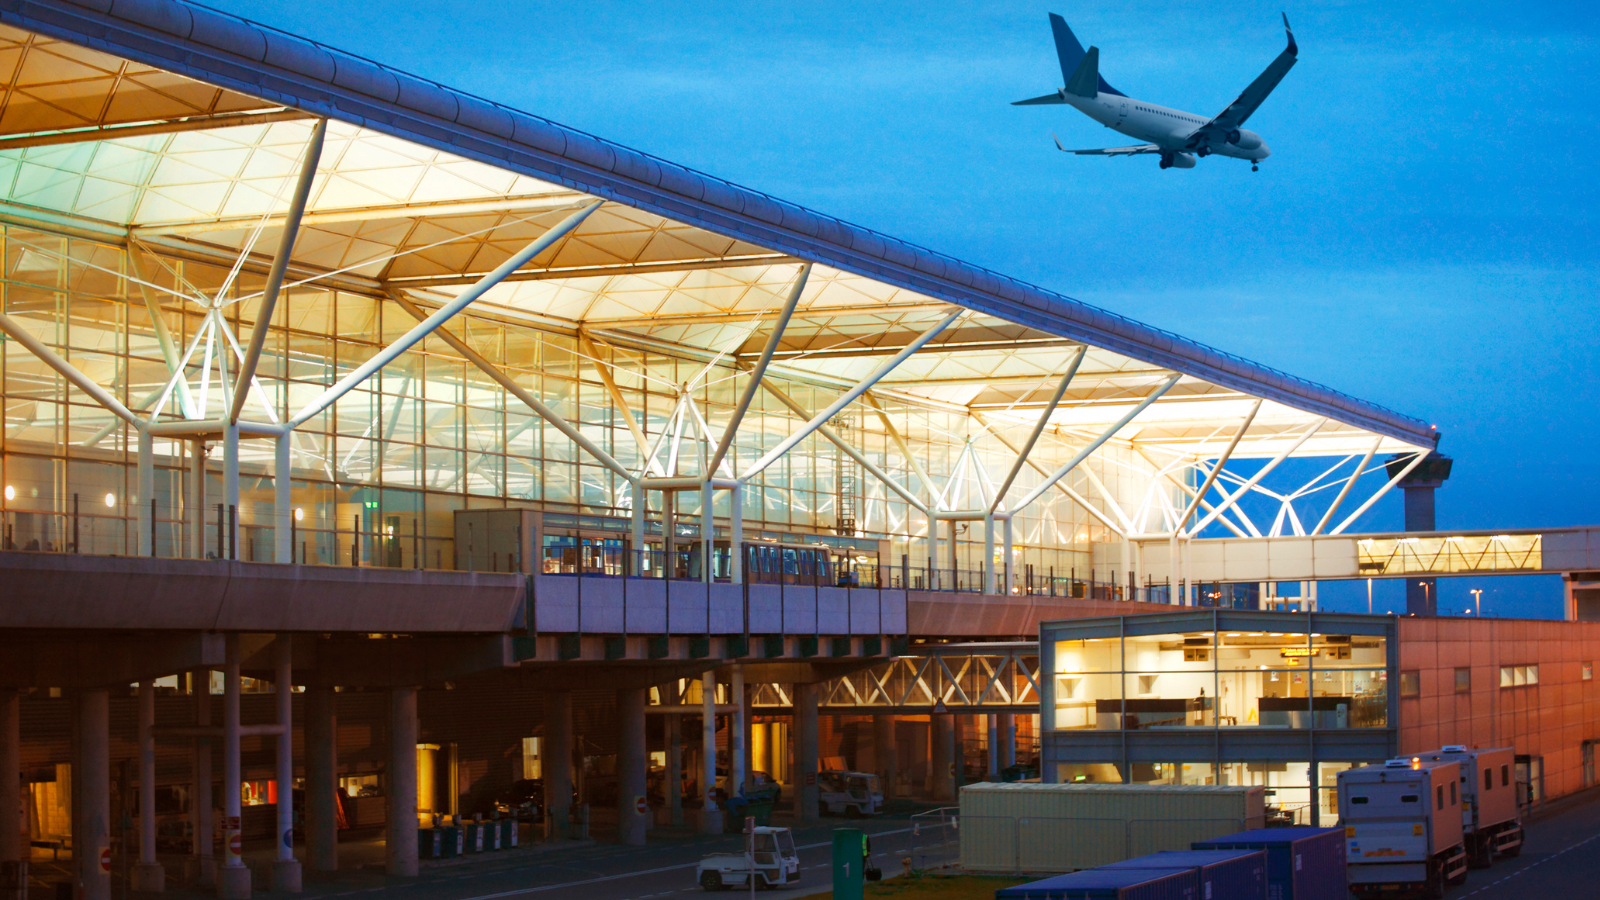 An image of Stansted Airport with an aeroplane flying above in the sky.